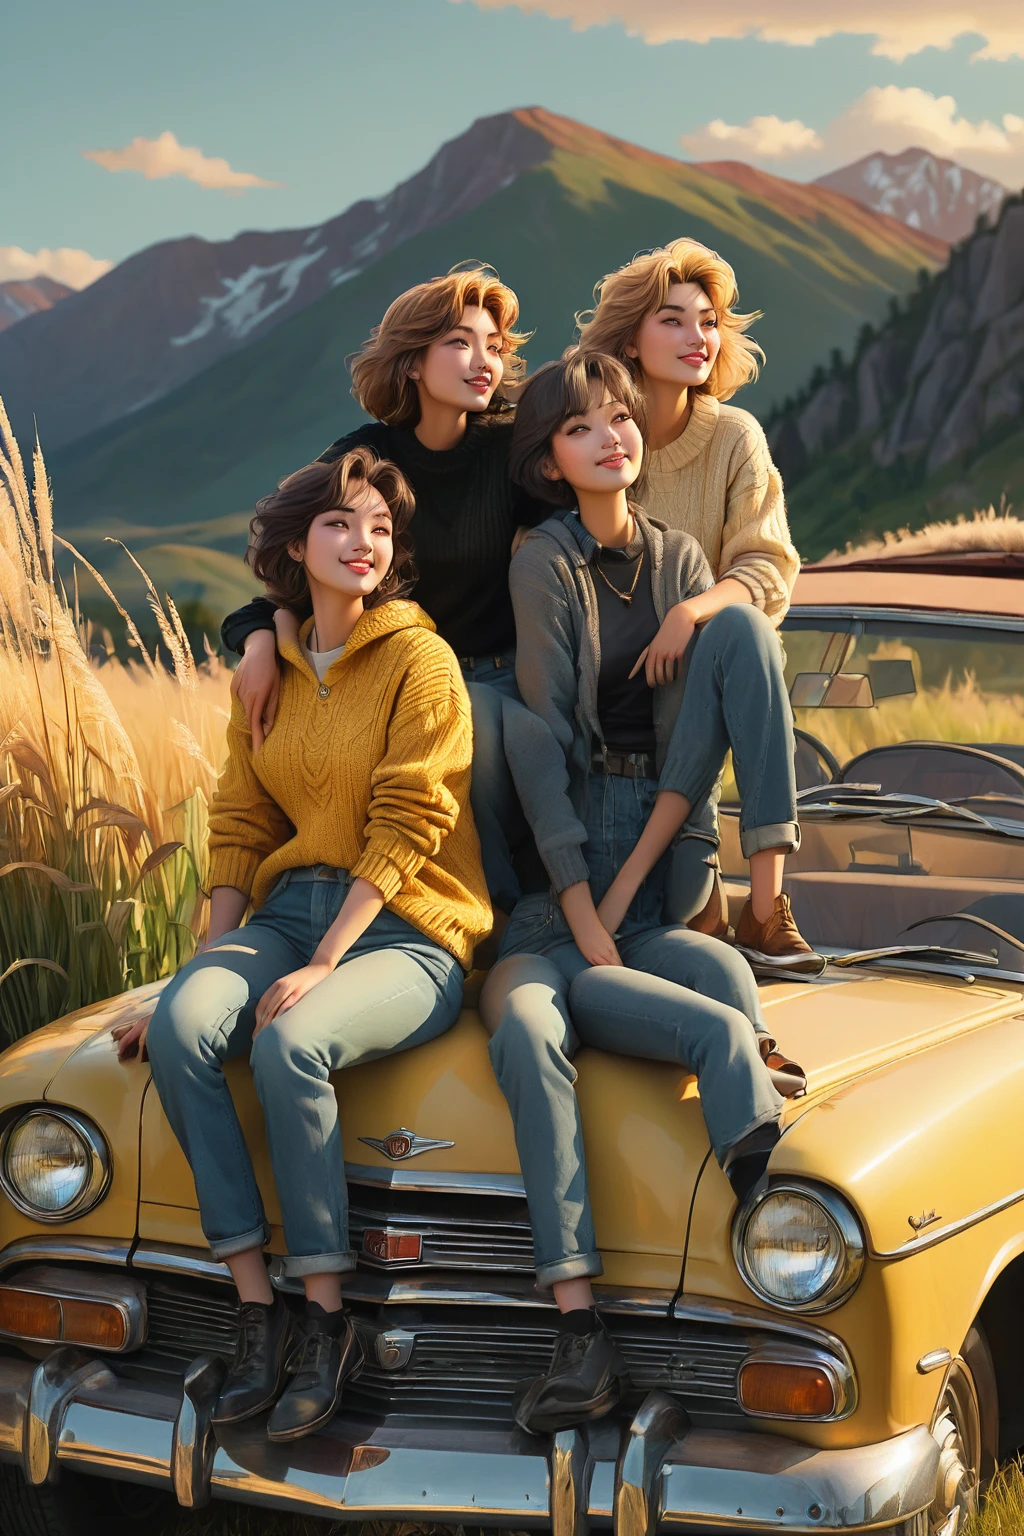 Real photo of two individuals sitting on the hood of a vintage car. The clothing should be casual, with one individual wearing a black top and jeans, and the other in a yellow sweater and light blue jeans. Both have medium-length hair styled in a relaxed manner. The location is outdoors during golden hour, with soft, warm lighting accentuating the scene. Tall grass surrounds the car, and mountains can be seen in the background under a clear sky. The pose is casual and friendly, with one individual facing slightly towards the camera while the other faces them as if engaged in conversation. Properties include the vintage car which should have a classic design indicative of mid-20th-century models. The camera angle is from a lower perspective looking up at the individuals to capture both their relaxed demeanor and the scenic background.
